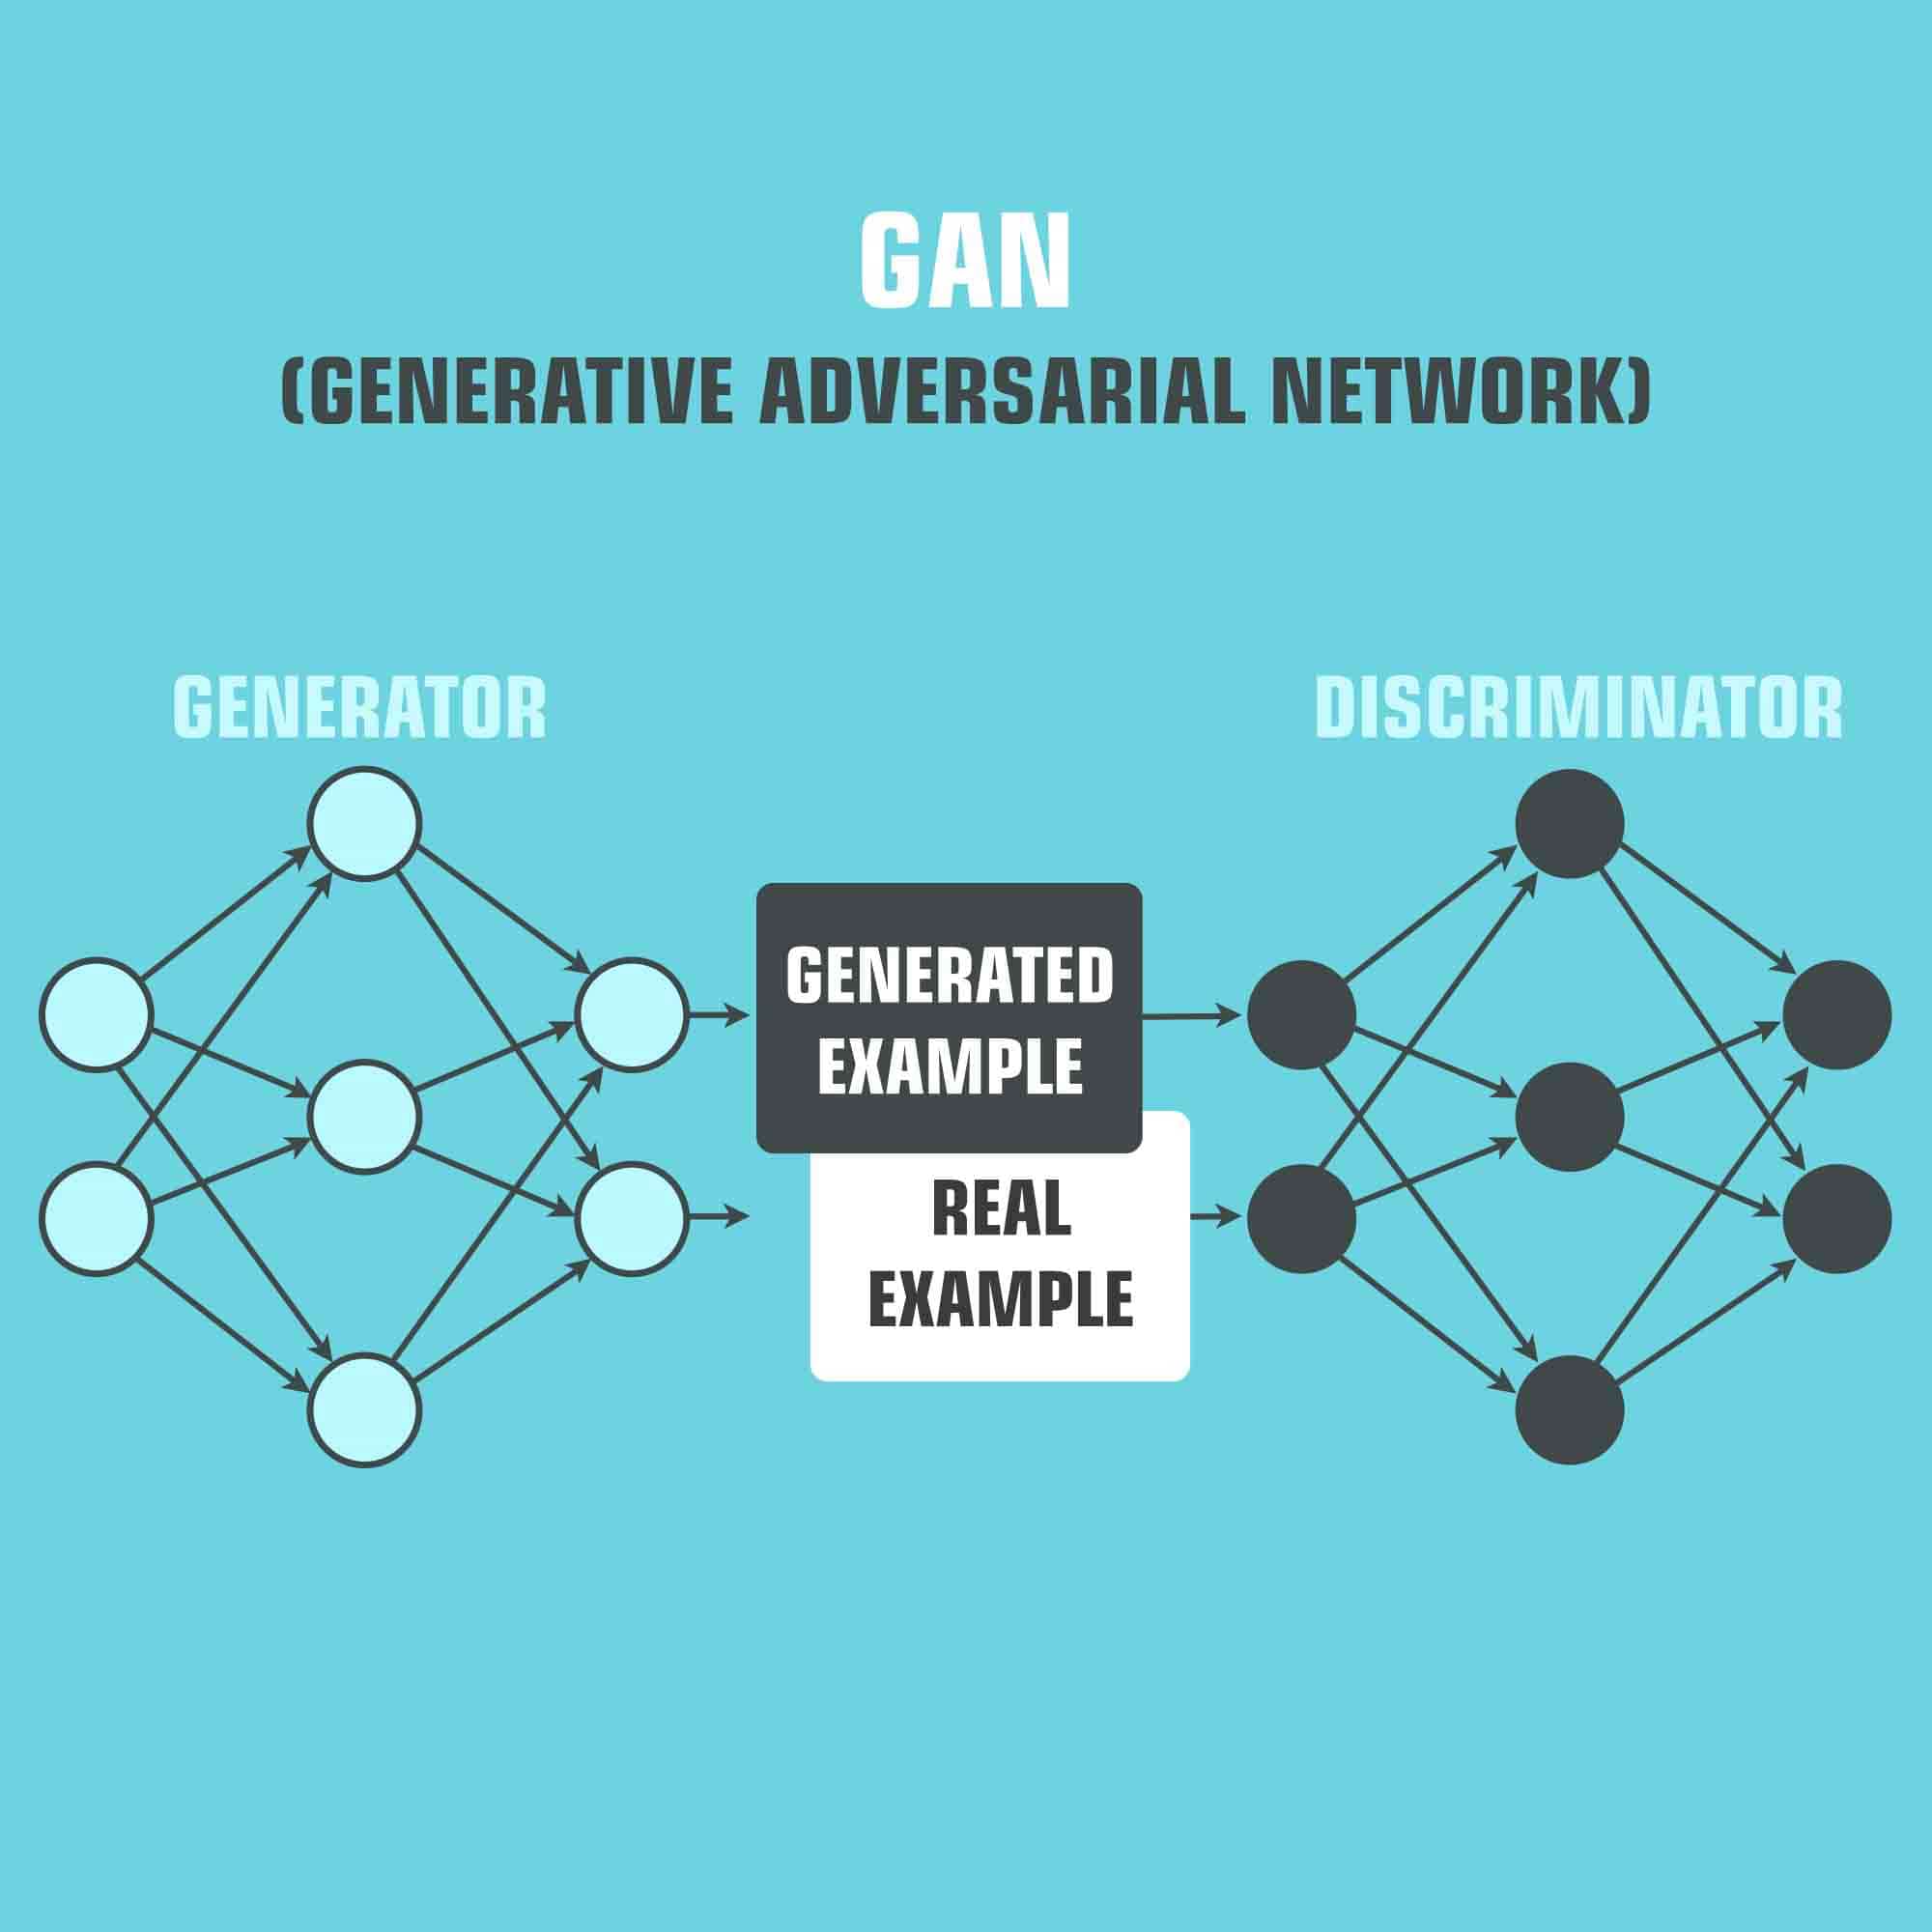 “Generative Adversarial Networks (GAN)” August 2021 — summary from Astrophysics Data System main image